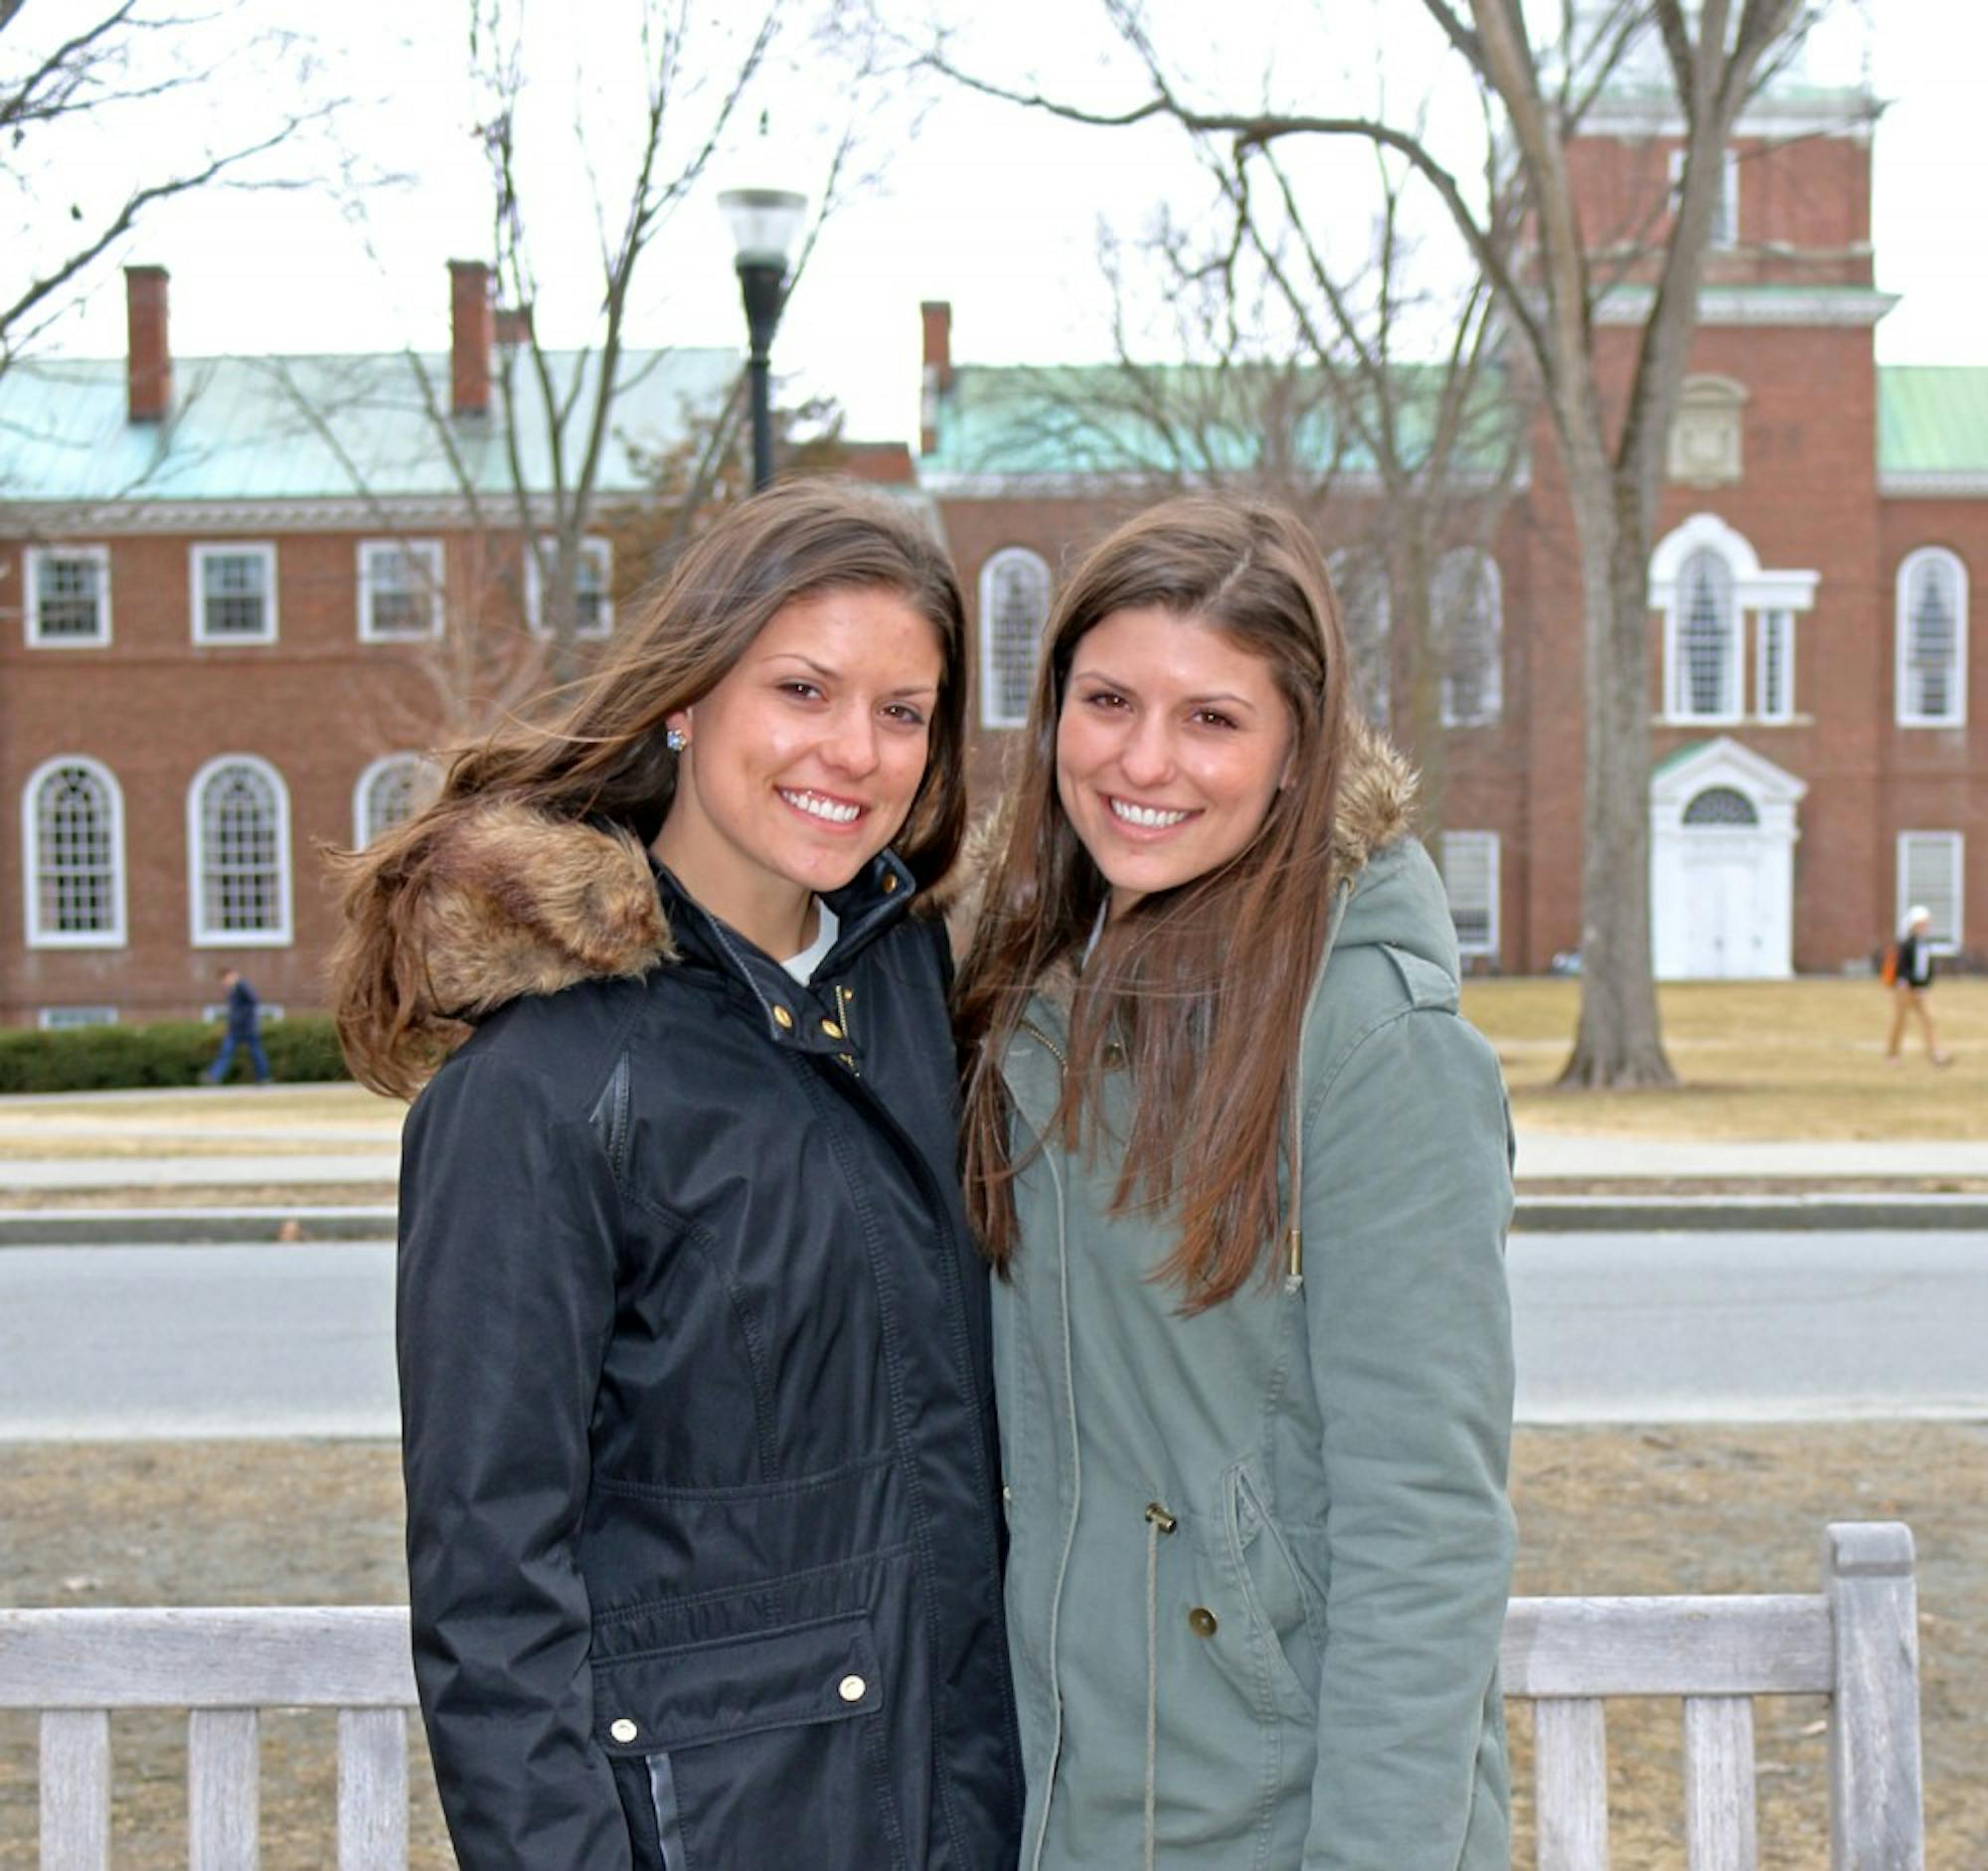 Sisters Anna and Sara Kikut ’16 were recruited as competitive skiers, but successfully switched to track and field.